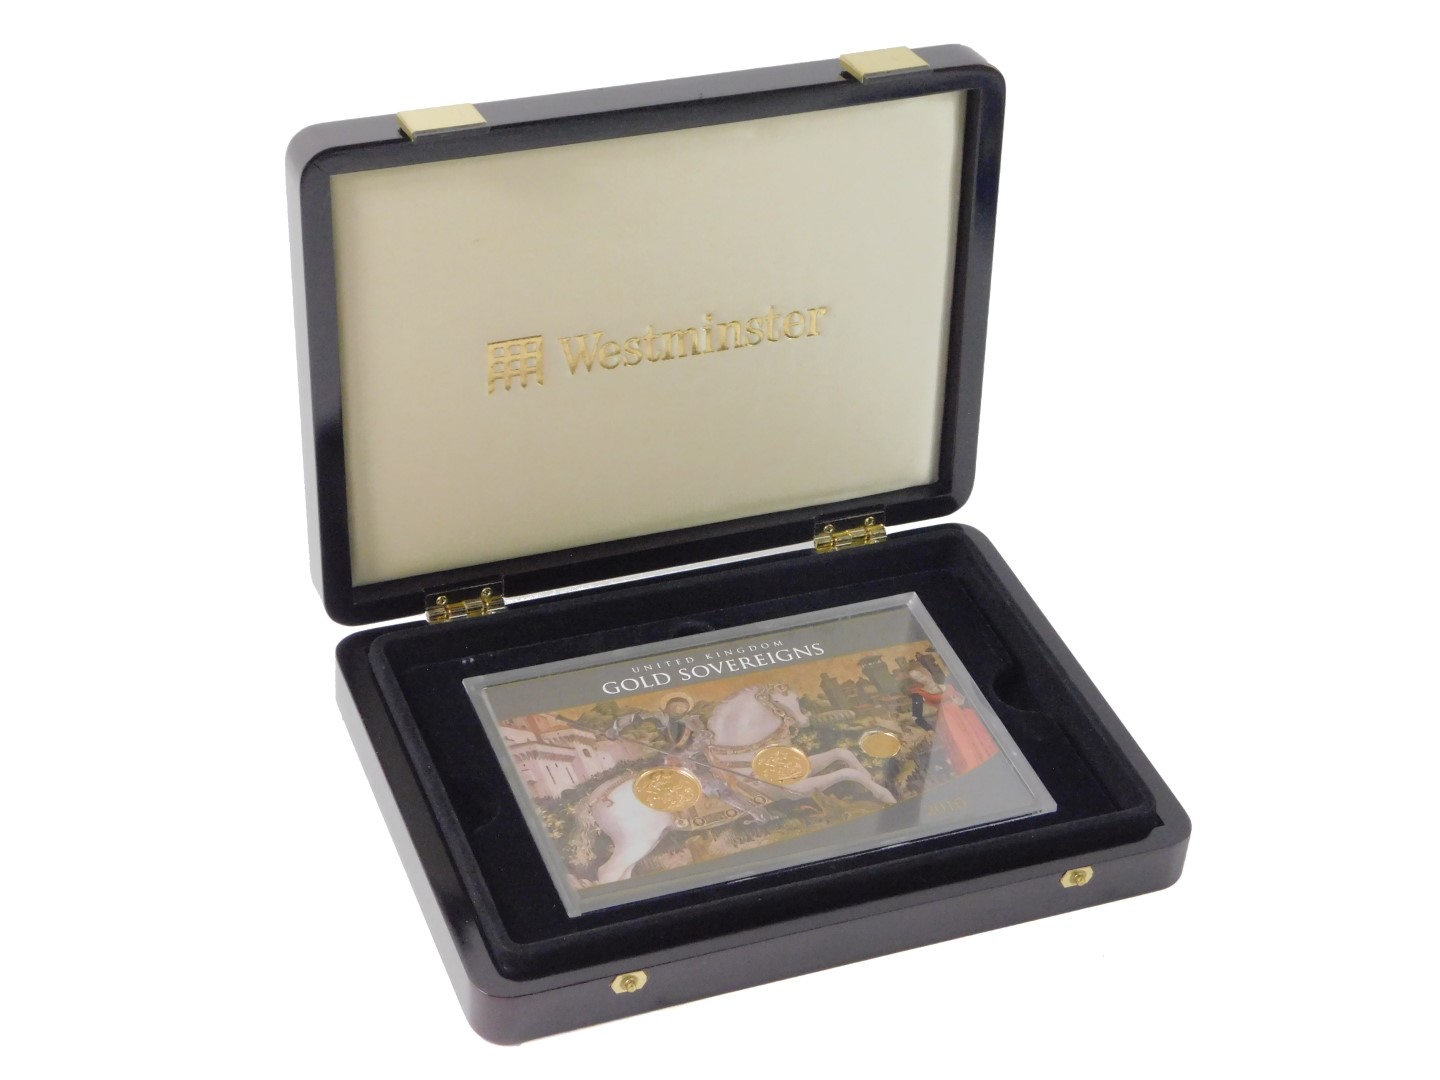 A Westminster Mint Executive gold sovereign set 2010, comprising sovereign, half sovereign, and